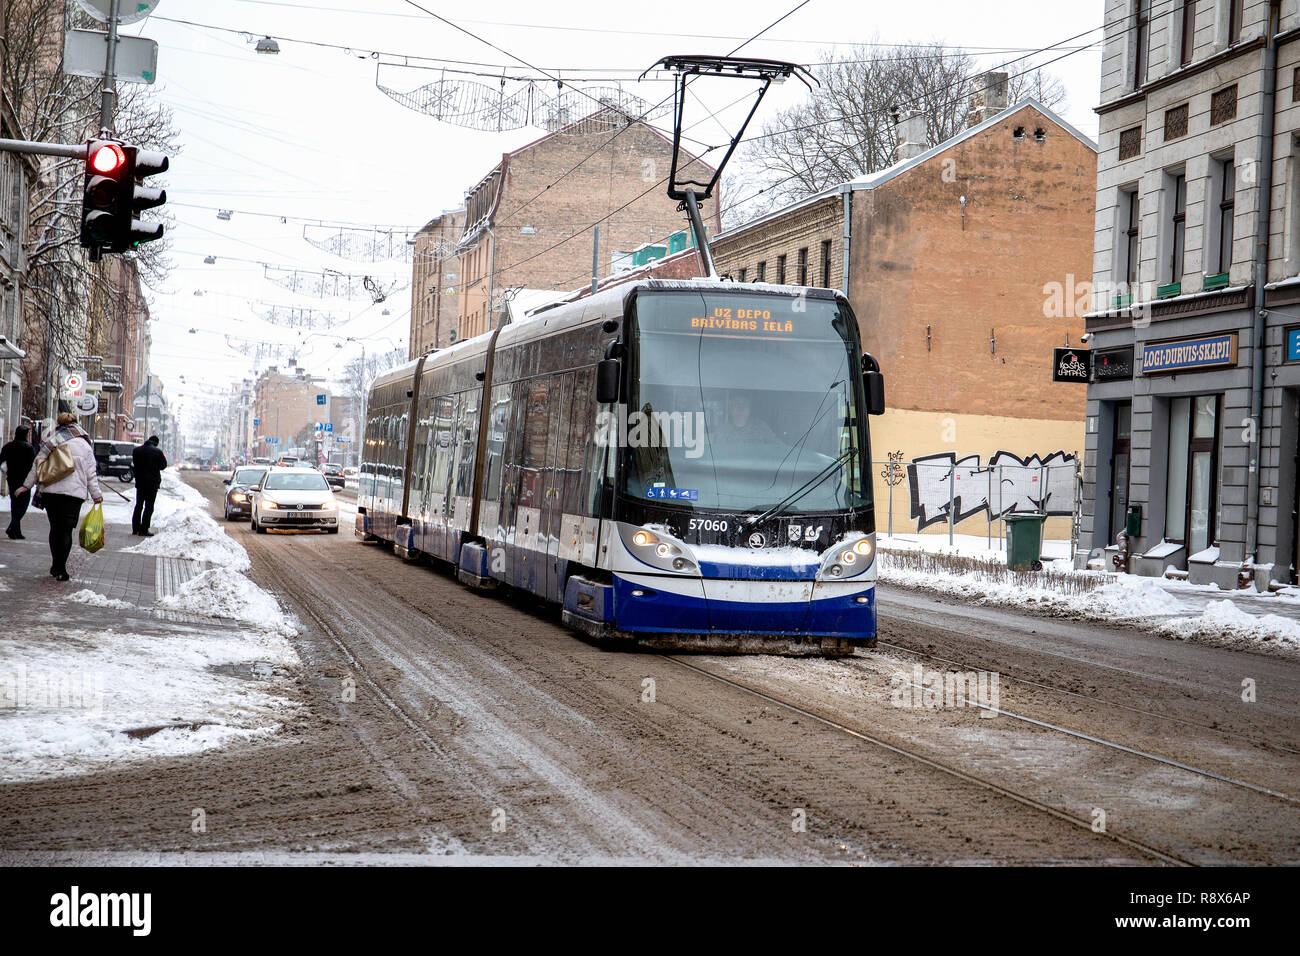 Rigas Satiksme. English: Traffic of Riga, is a municipally-owned public transportation and parking authority serving Riga Stock Photo